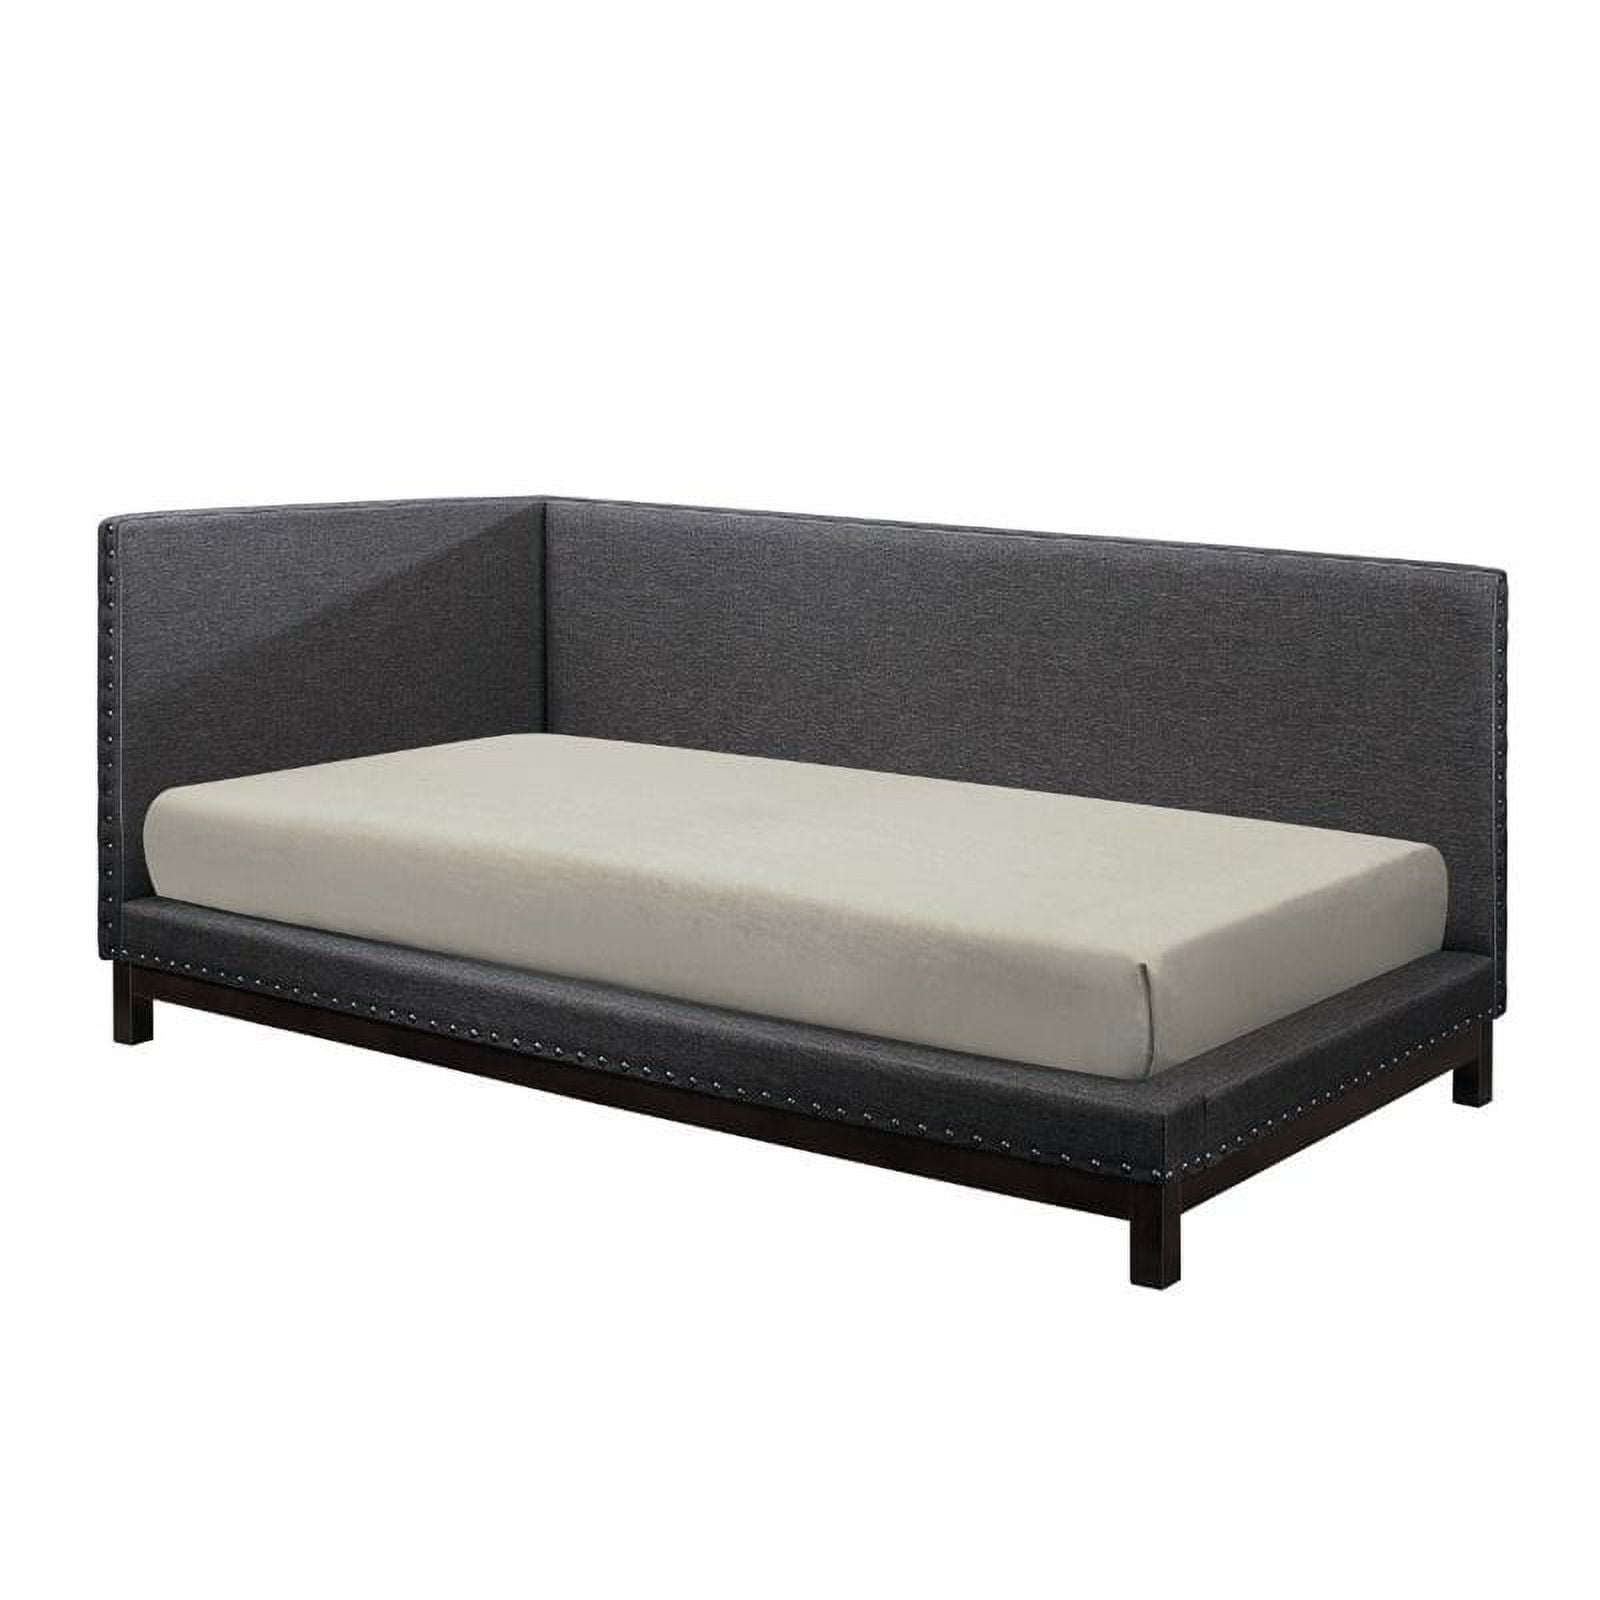 Lexicon Portage Upholstered Daybed in Gray